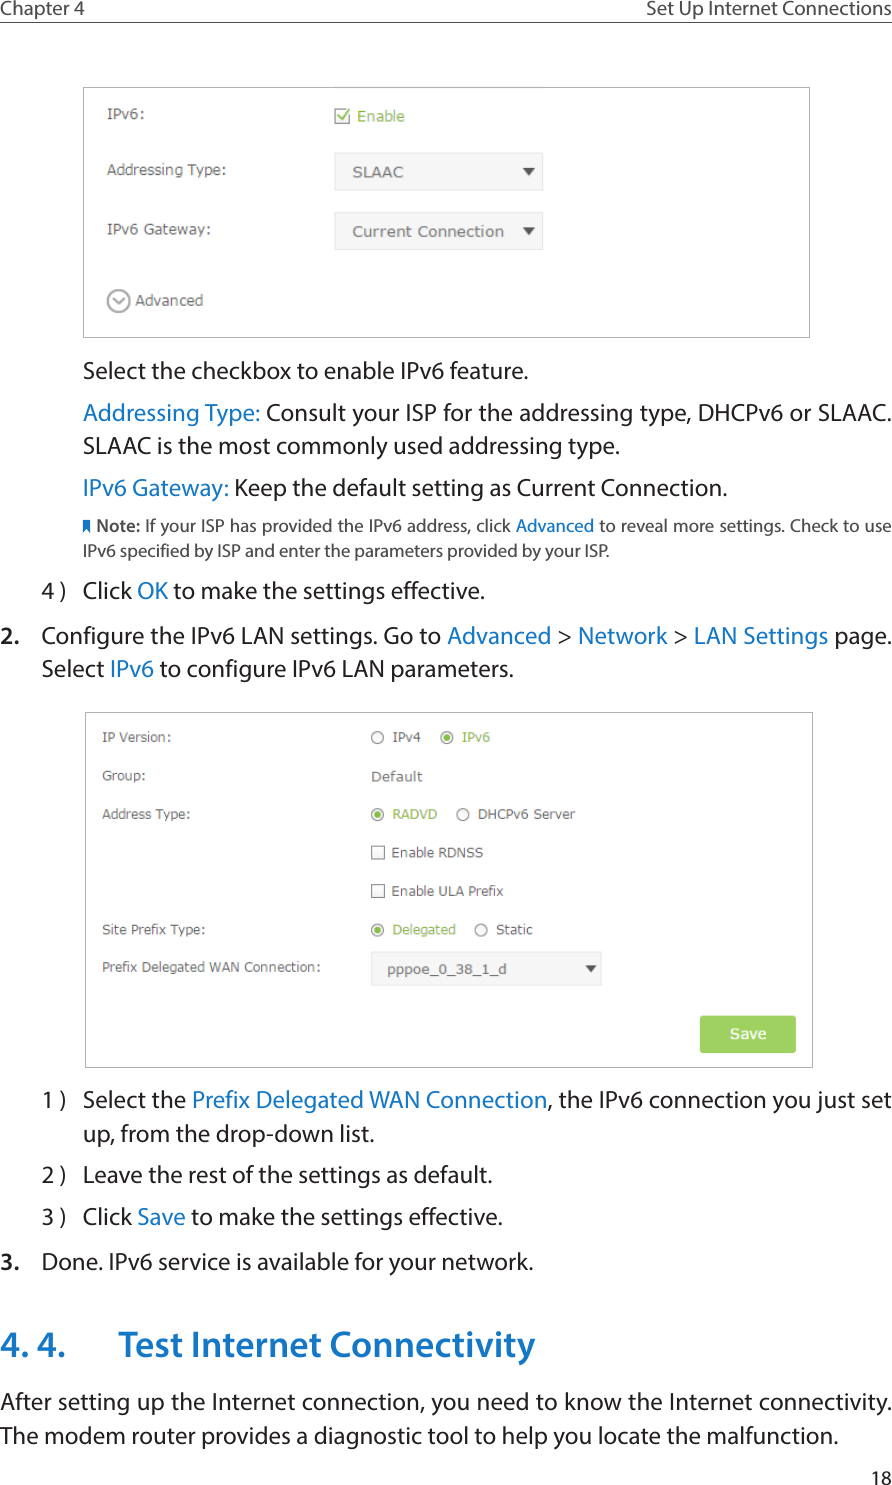 18Chapter 4 Set Up Internet ConnectionsSelect the checkbox to enable IPv6 feature.Addressing Type: Consult your ISP for the addressing type, DHCPv6 or SLAAC. SLAAC is the most commonly used addressing type.IPv6 Gateway: Keep the default setting as Current Connection.Note: If your ISP has provided the IPv6 address, click Advanced to reveal more settings. Check to use IPv6 specified by ISP and enter the parameters provided by your ISP.4 )  Click OK to make the settings effective.2.  Configure the IPv6 LAN settings. Go to Advanced &gt; Network &gt; LAN Settings page. Select IPv6 to configure IPv6 LAN parameters. 1 )  Select the Prefix Delegated WAN Connection, the IPv6 connection you just set up, from the drop-down list.2 )  Leave the rest of the settings as default.3 )  Click Save to make the settings effective.3.  Done. IPv6 service is available for your network.4. 4.  Test Internet ConnectivityAfter setting up the Internet connection, you need to know the Internet connectivity. The modem router provides a diagnostic tool to help you locate the malfunction.